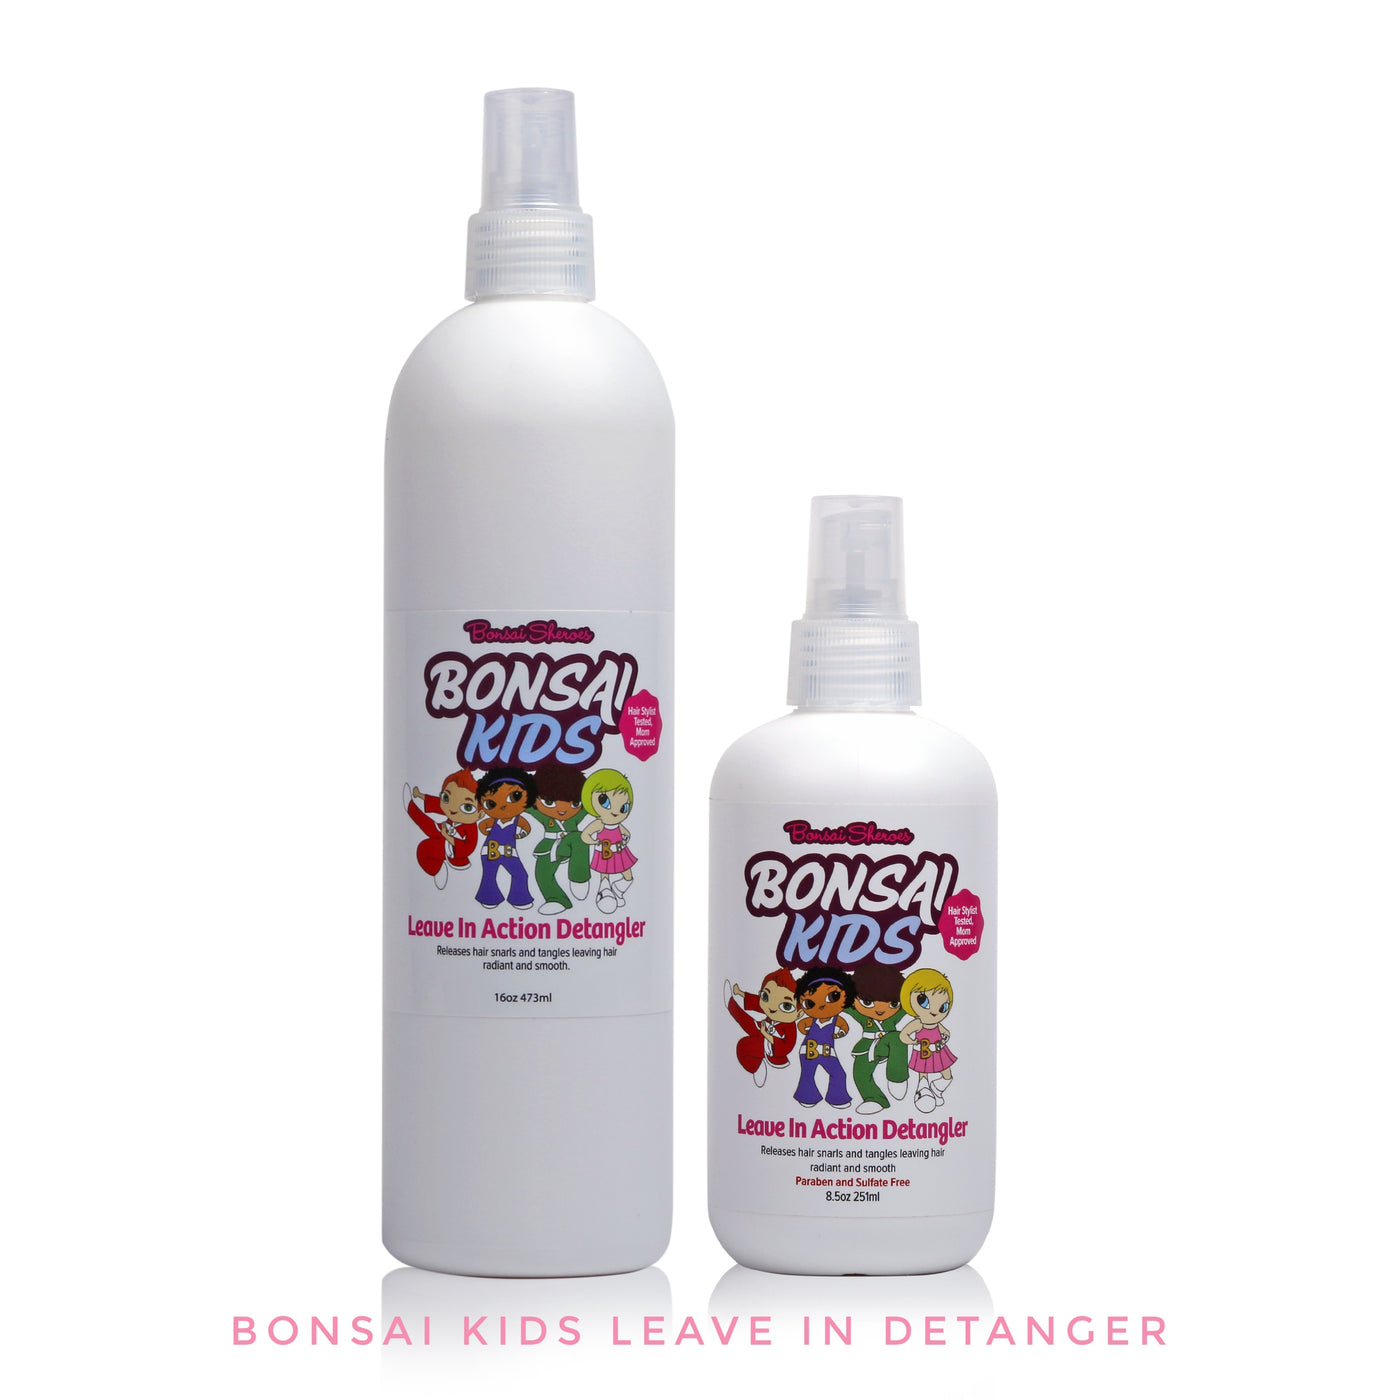 How To Stretch Your Babies Hair - Using Bonsai Kids Leave In Detangler